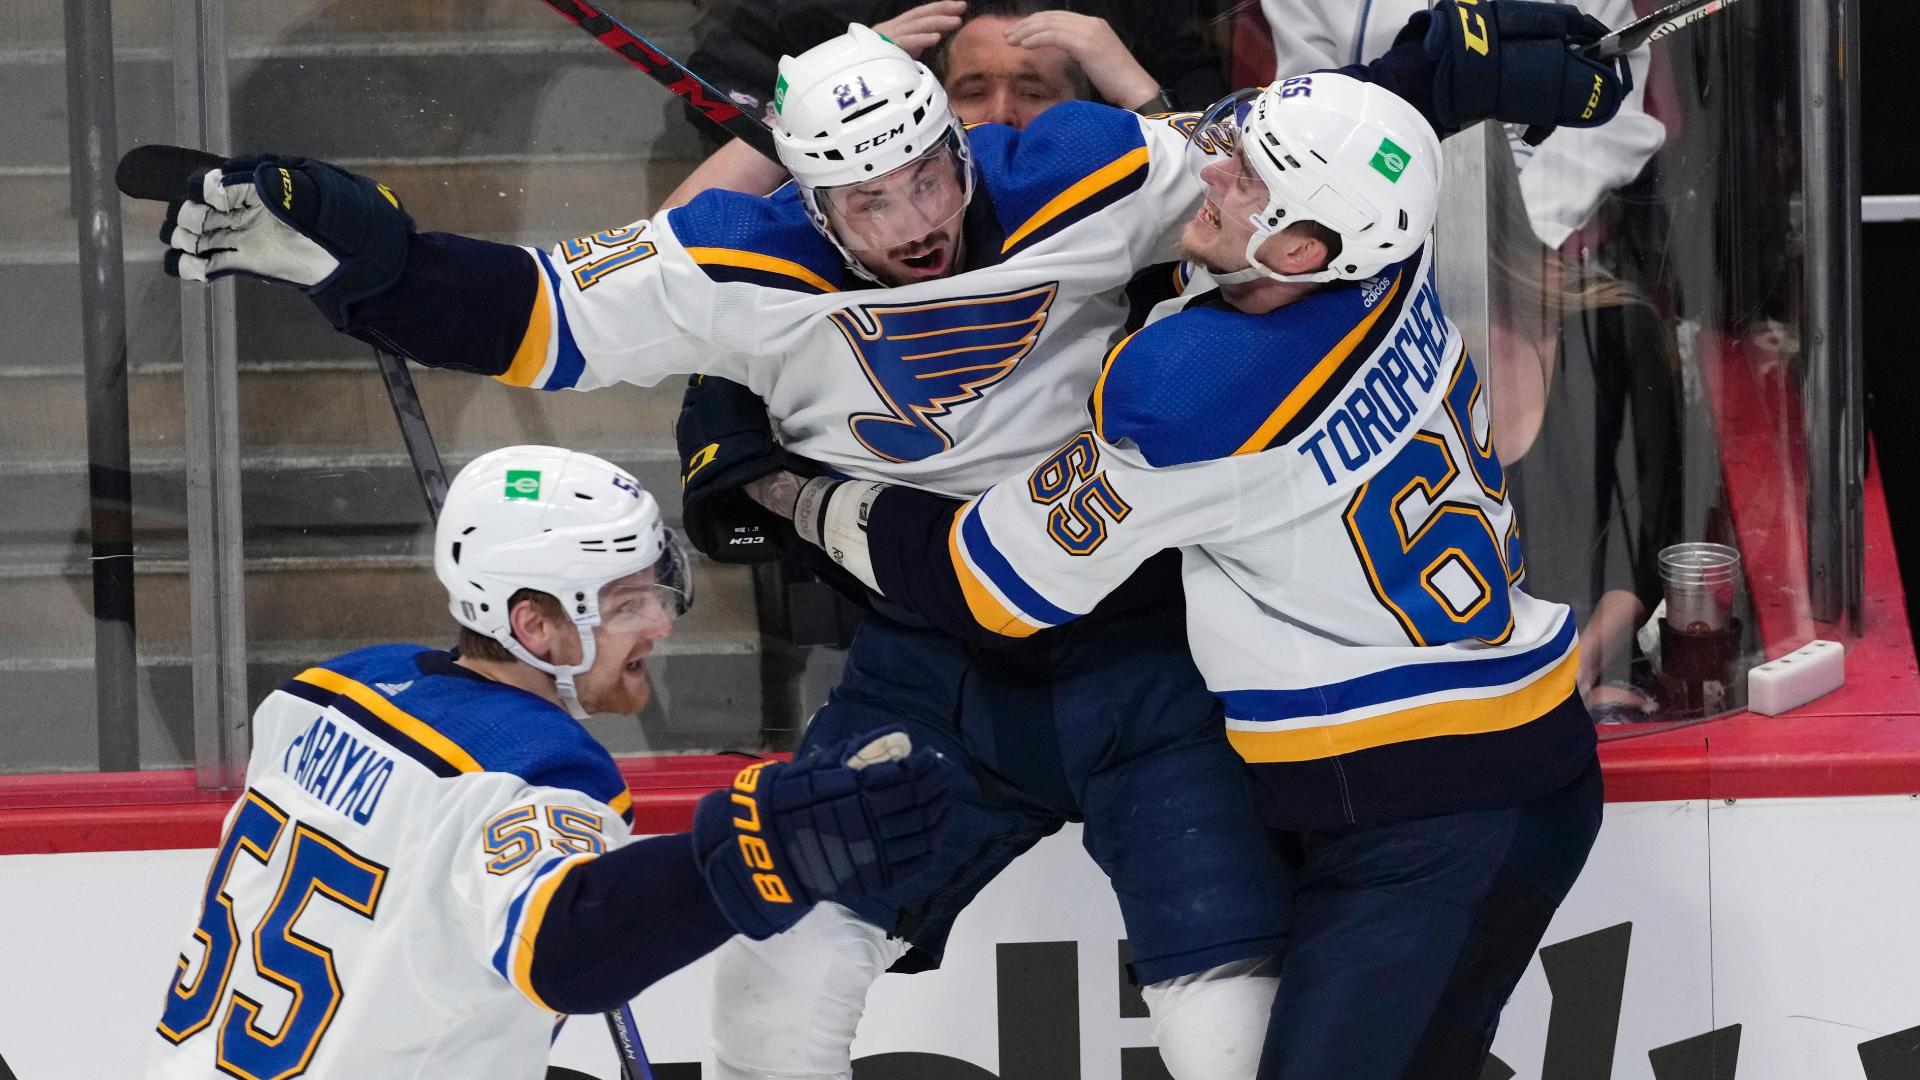 Thomas completes comeback as Blues rally from down 3-1, beat